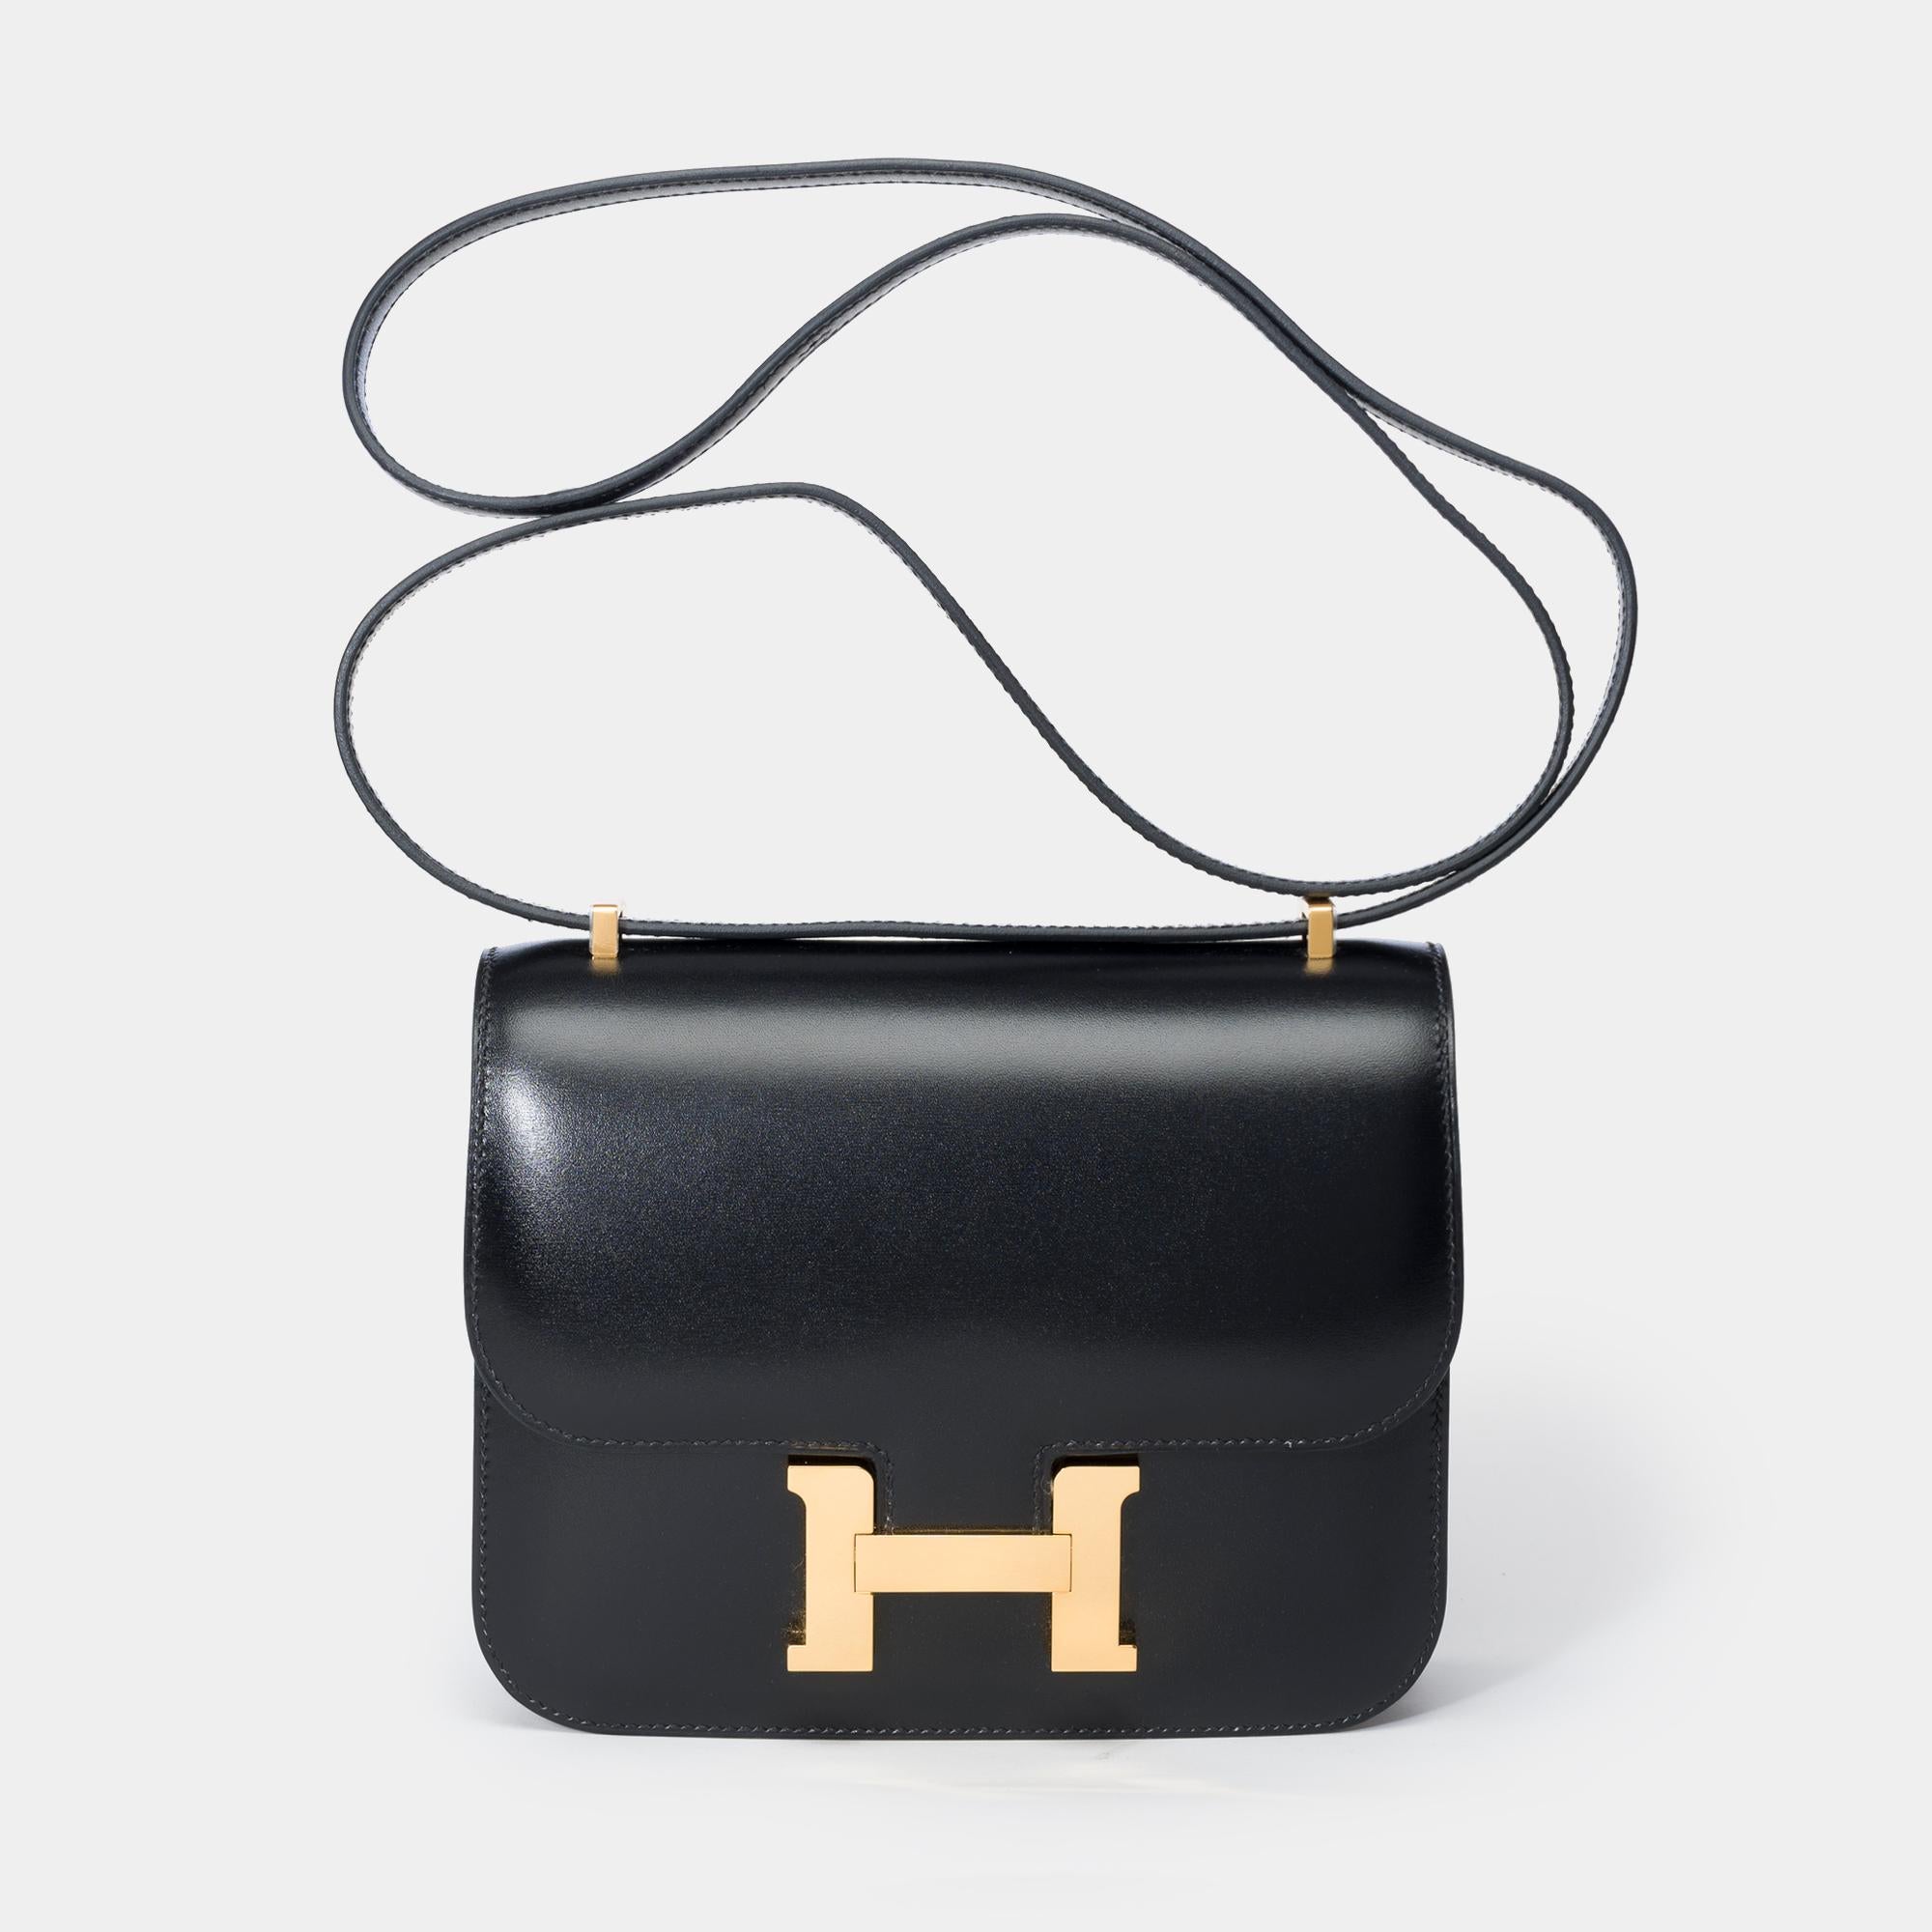 Stunning and Rare Hermès Constance III Mini 18 Mirror shoulder bag in black box calf leather, gold plated metal trim ,a black box leather shoulder strap for shoulder or crossbody carry

Logo closure on flap
Black leather lining, two compartments,